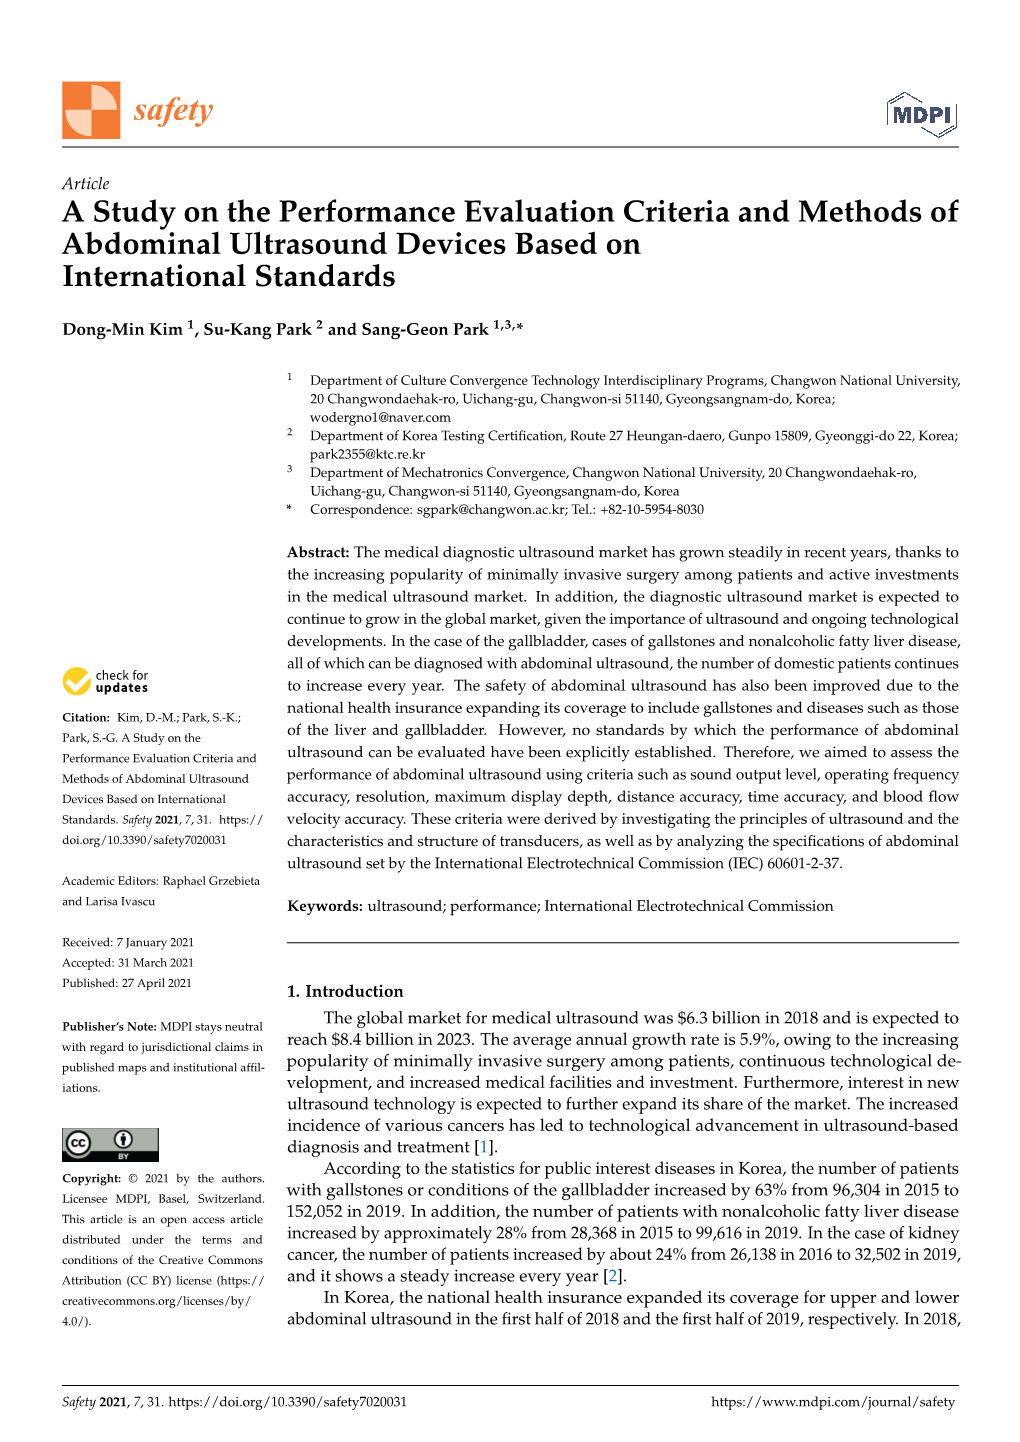 A Study on the Performance Evaluation Criteria and Methods of Abdominal Ultrasound Devices Based on International Standards